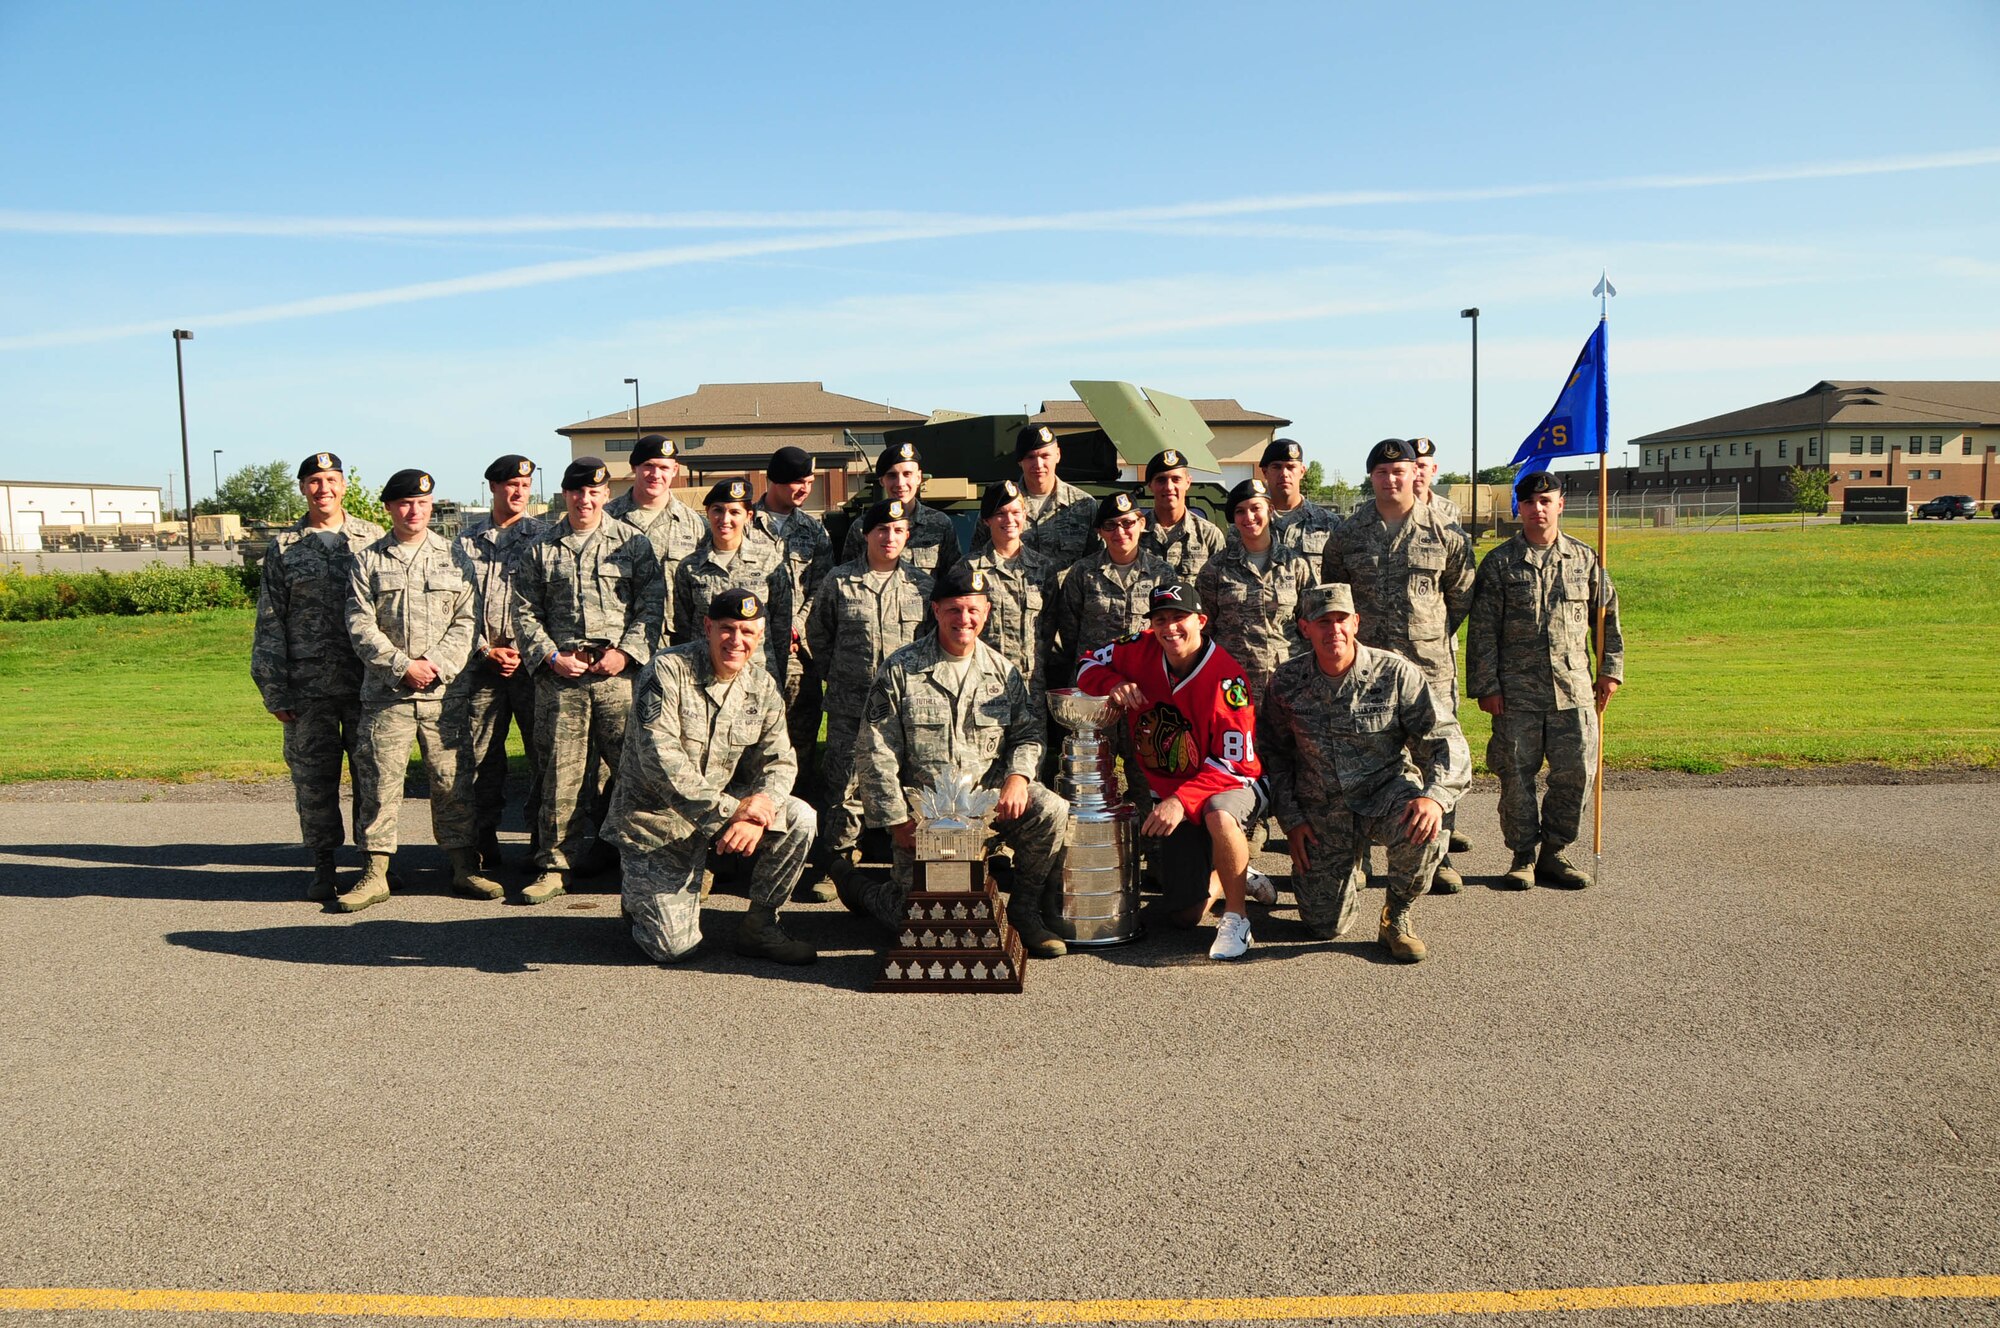 107th Airlift Wing’s Security Forces pose with Patrick Kane and the Stanley Cup and Conn Smythe trophies, they provided security and escort duties for his visit to the Niagara Falls Air Reserve Station on Aug.24, 2013. (Air National Guard Photo/ Senior Master Sgt. Ray Lloyd)